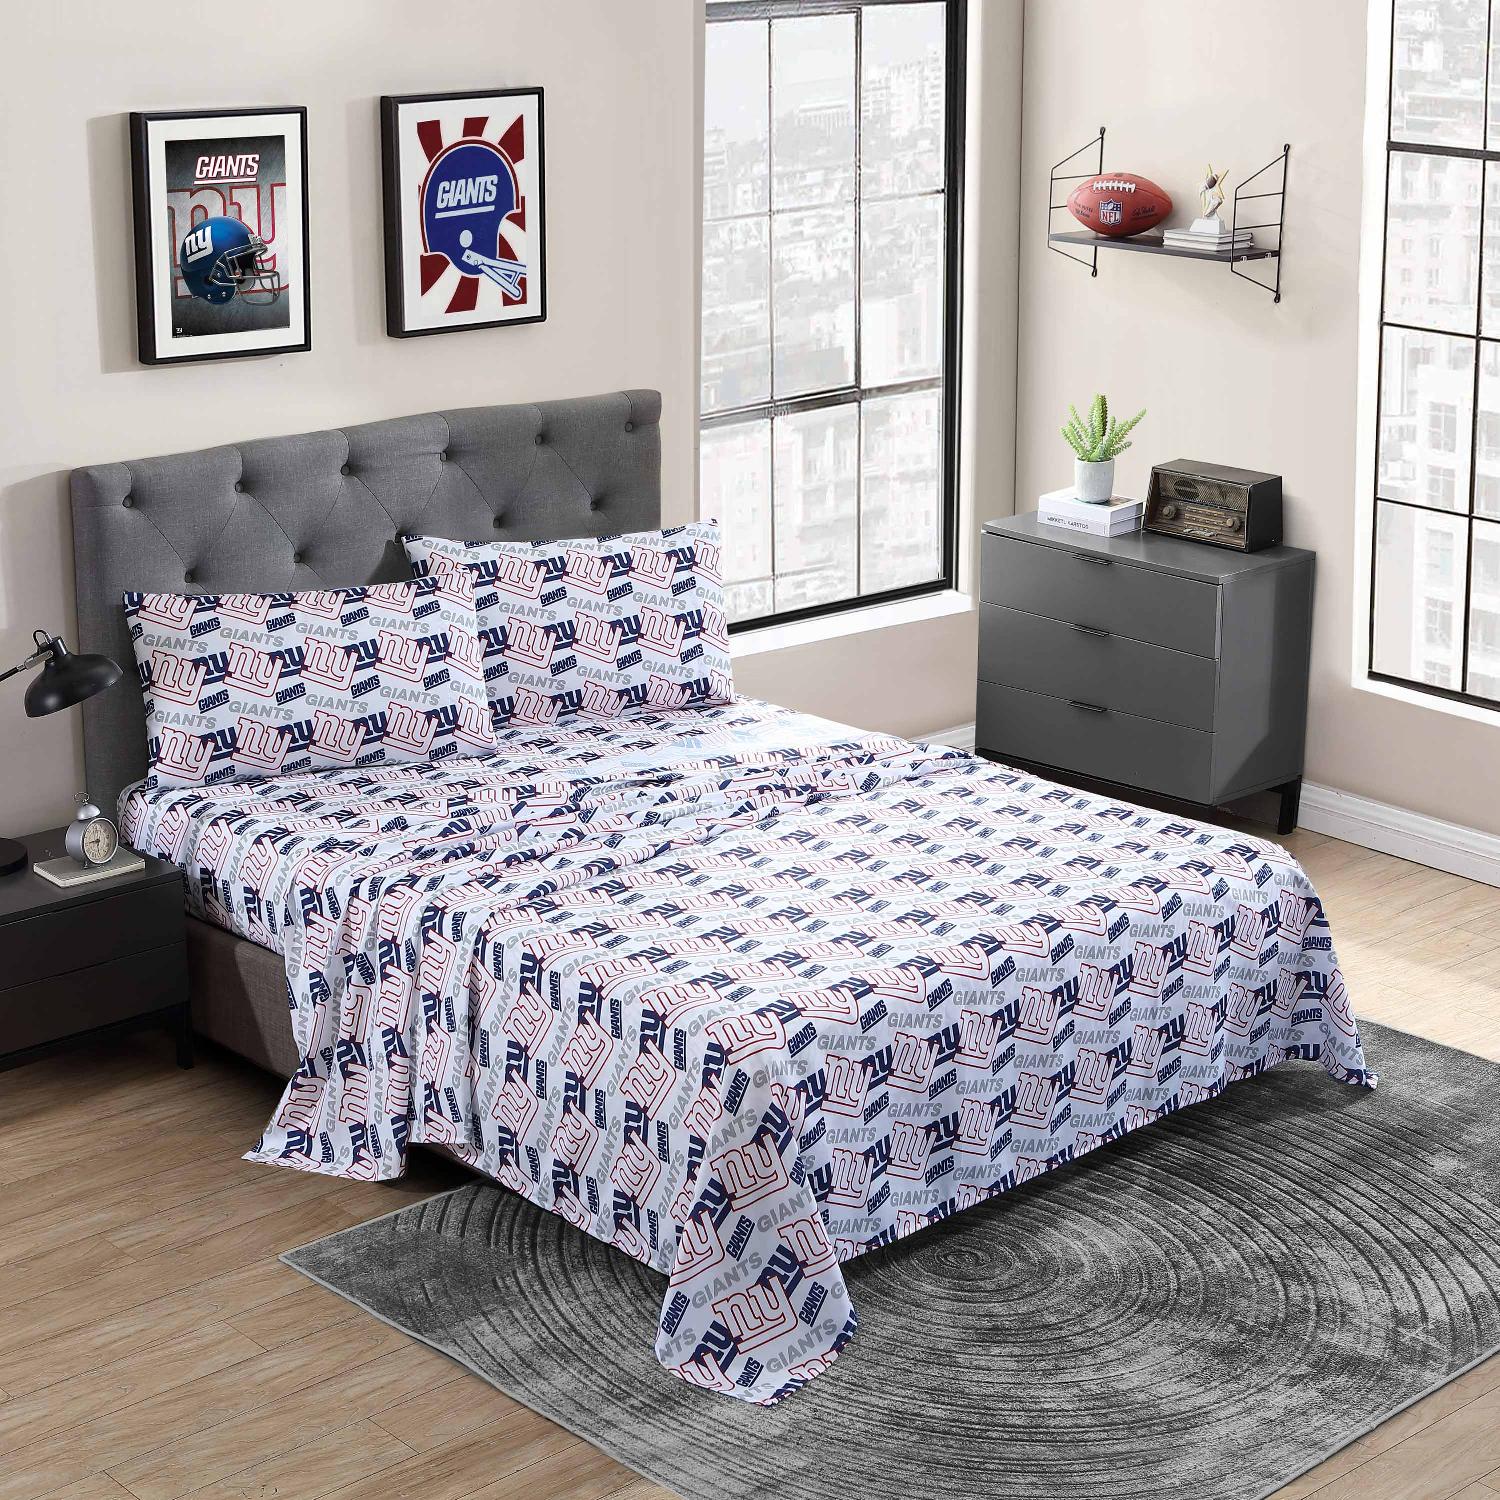 New York Giants NFL Officially Licensed 4-Piece Sheet Set - Bed